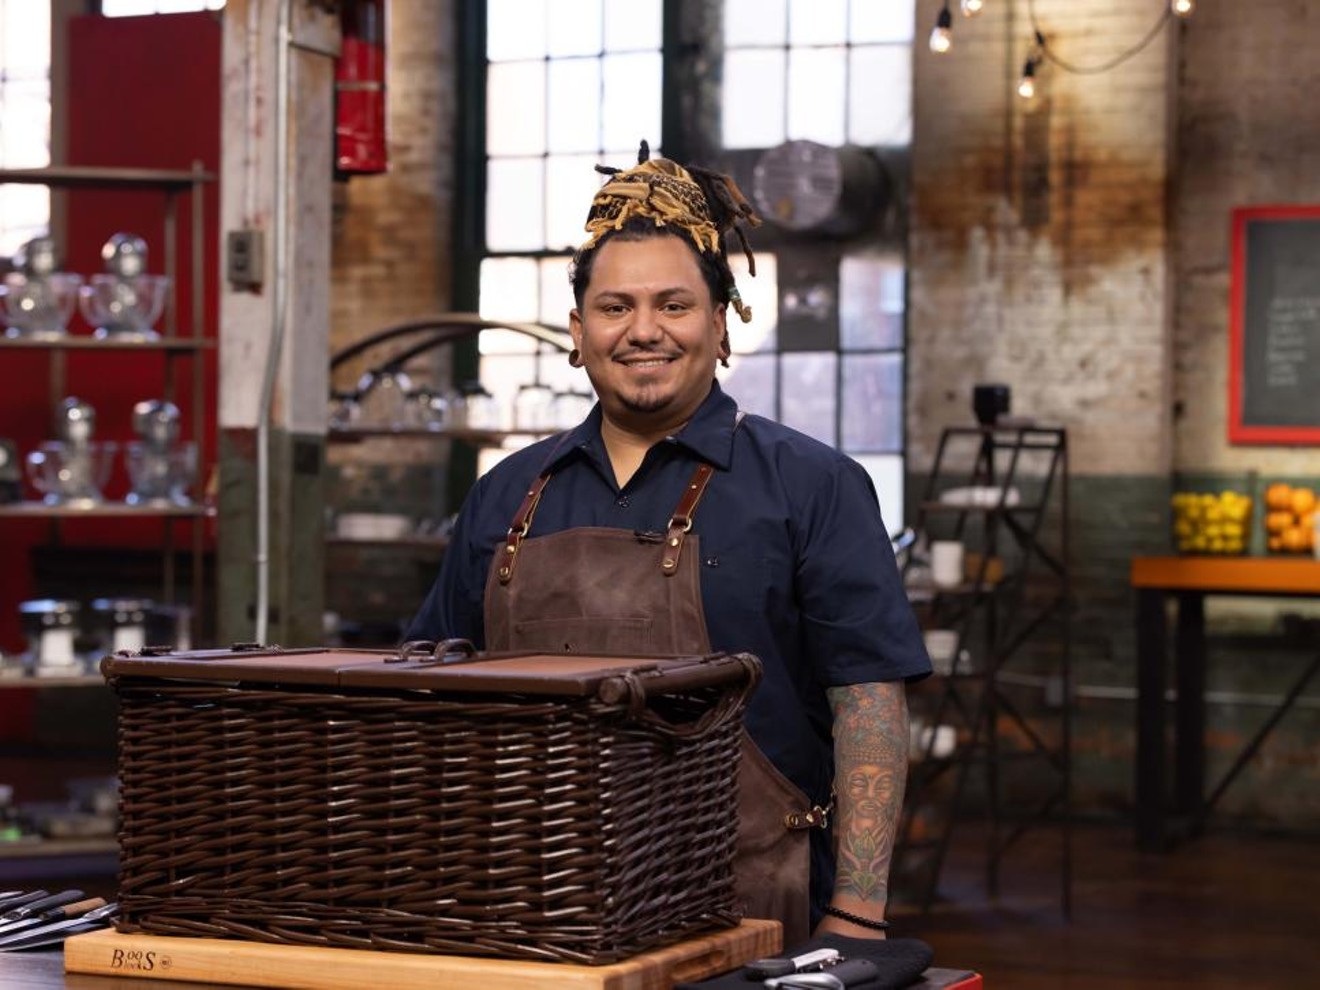 Zuri Resendiz will compete on the finale of Chopped's "Playing With Fire" tournament, which airs September 7.